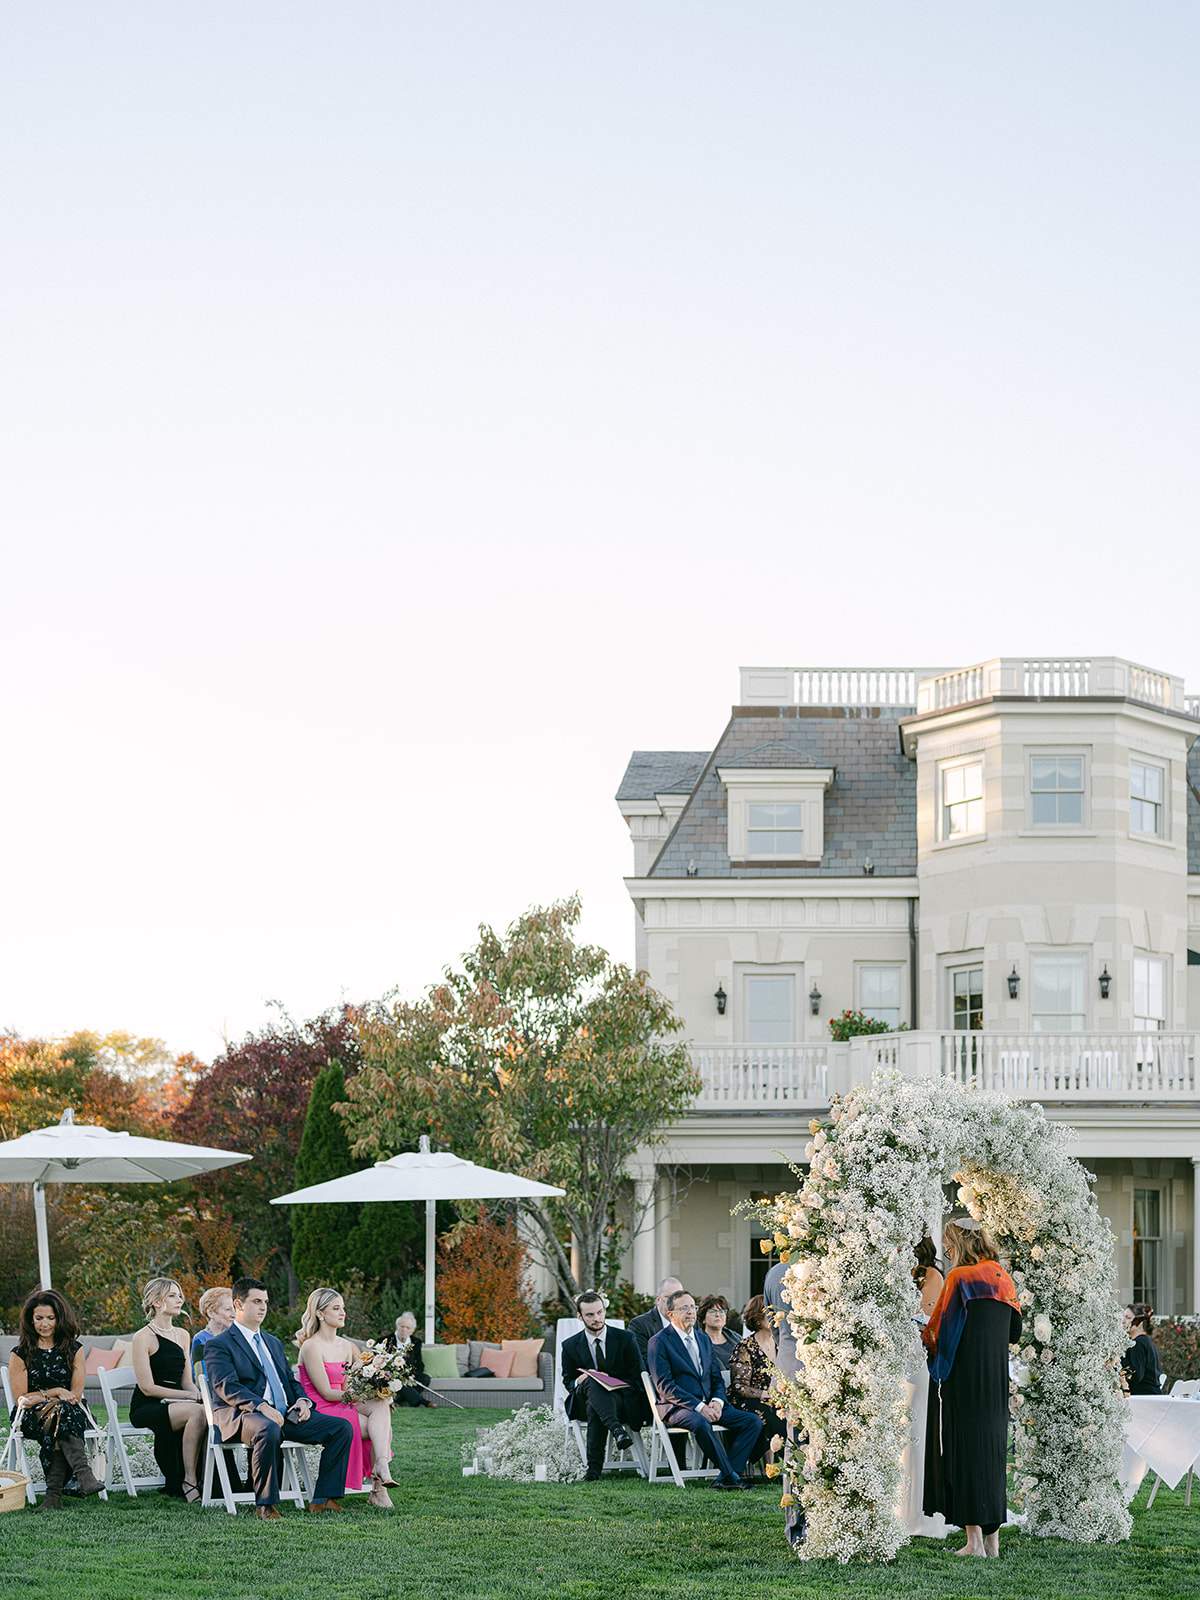 Wedding at The Chanler At Cliff Walk, outdoor ceremony